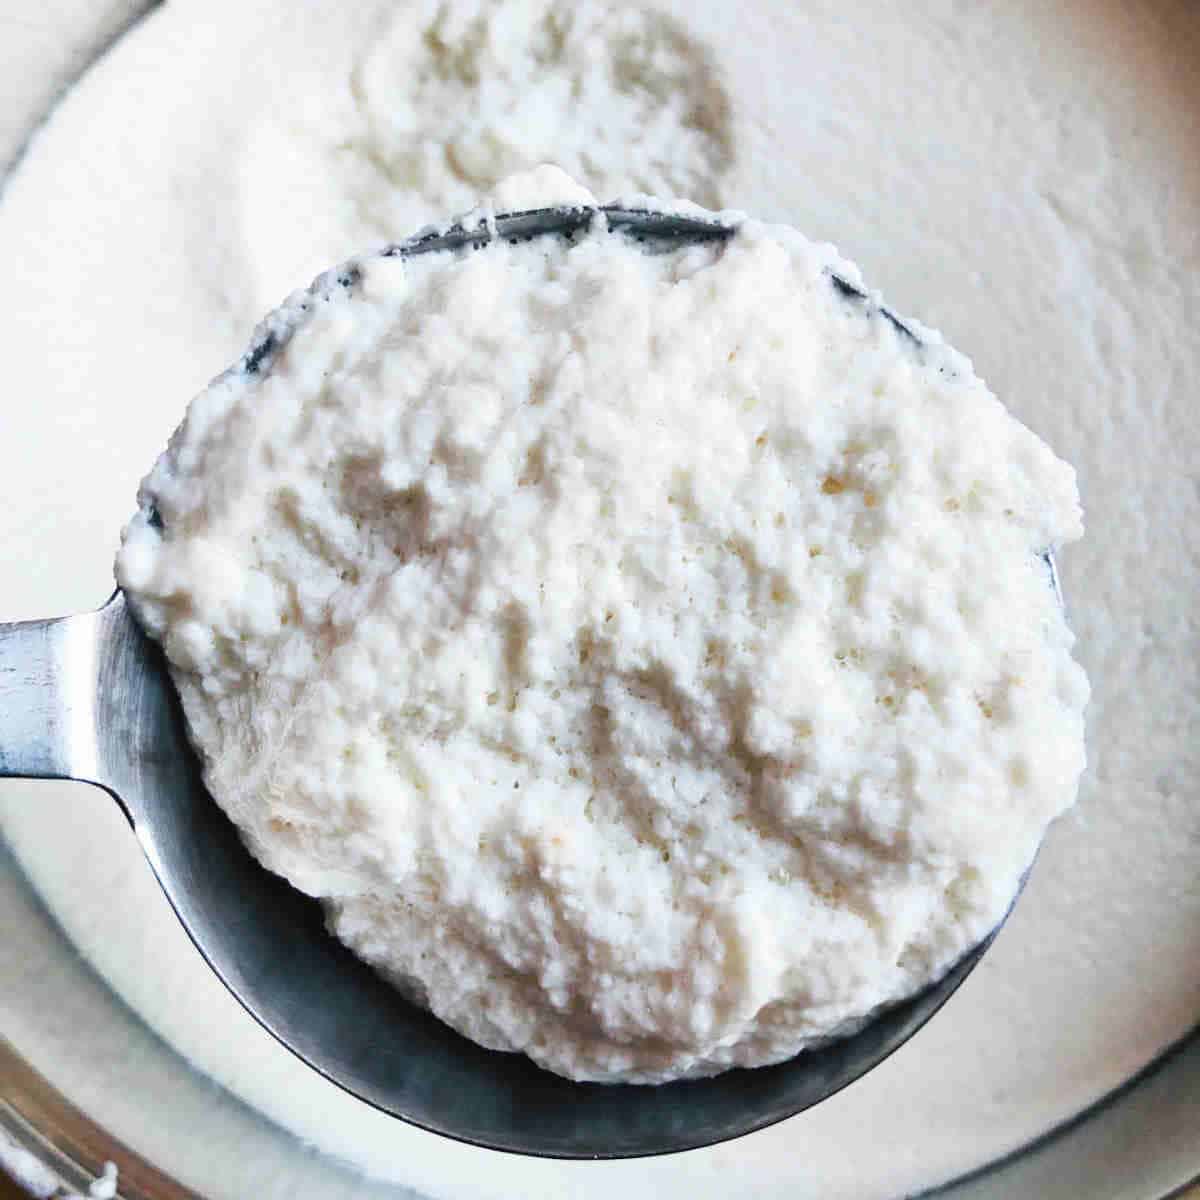 Dosa batter in a ladle.